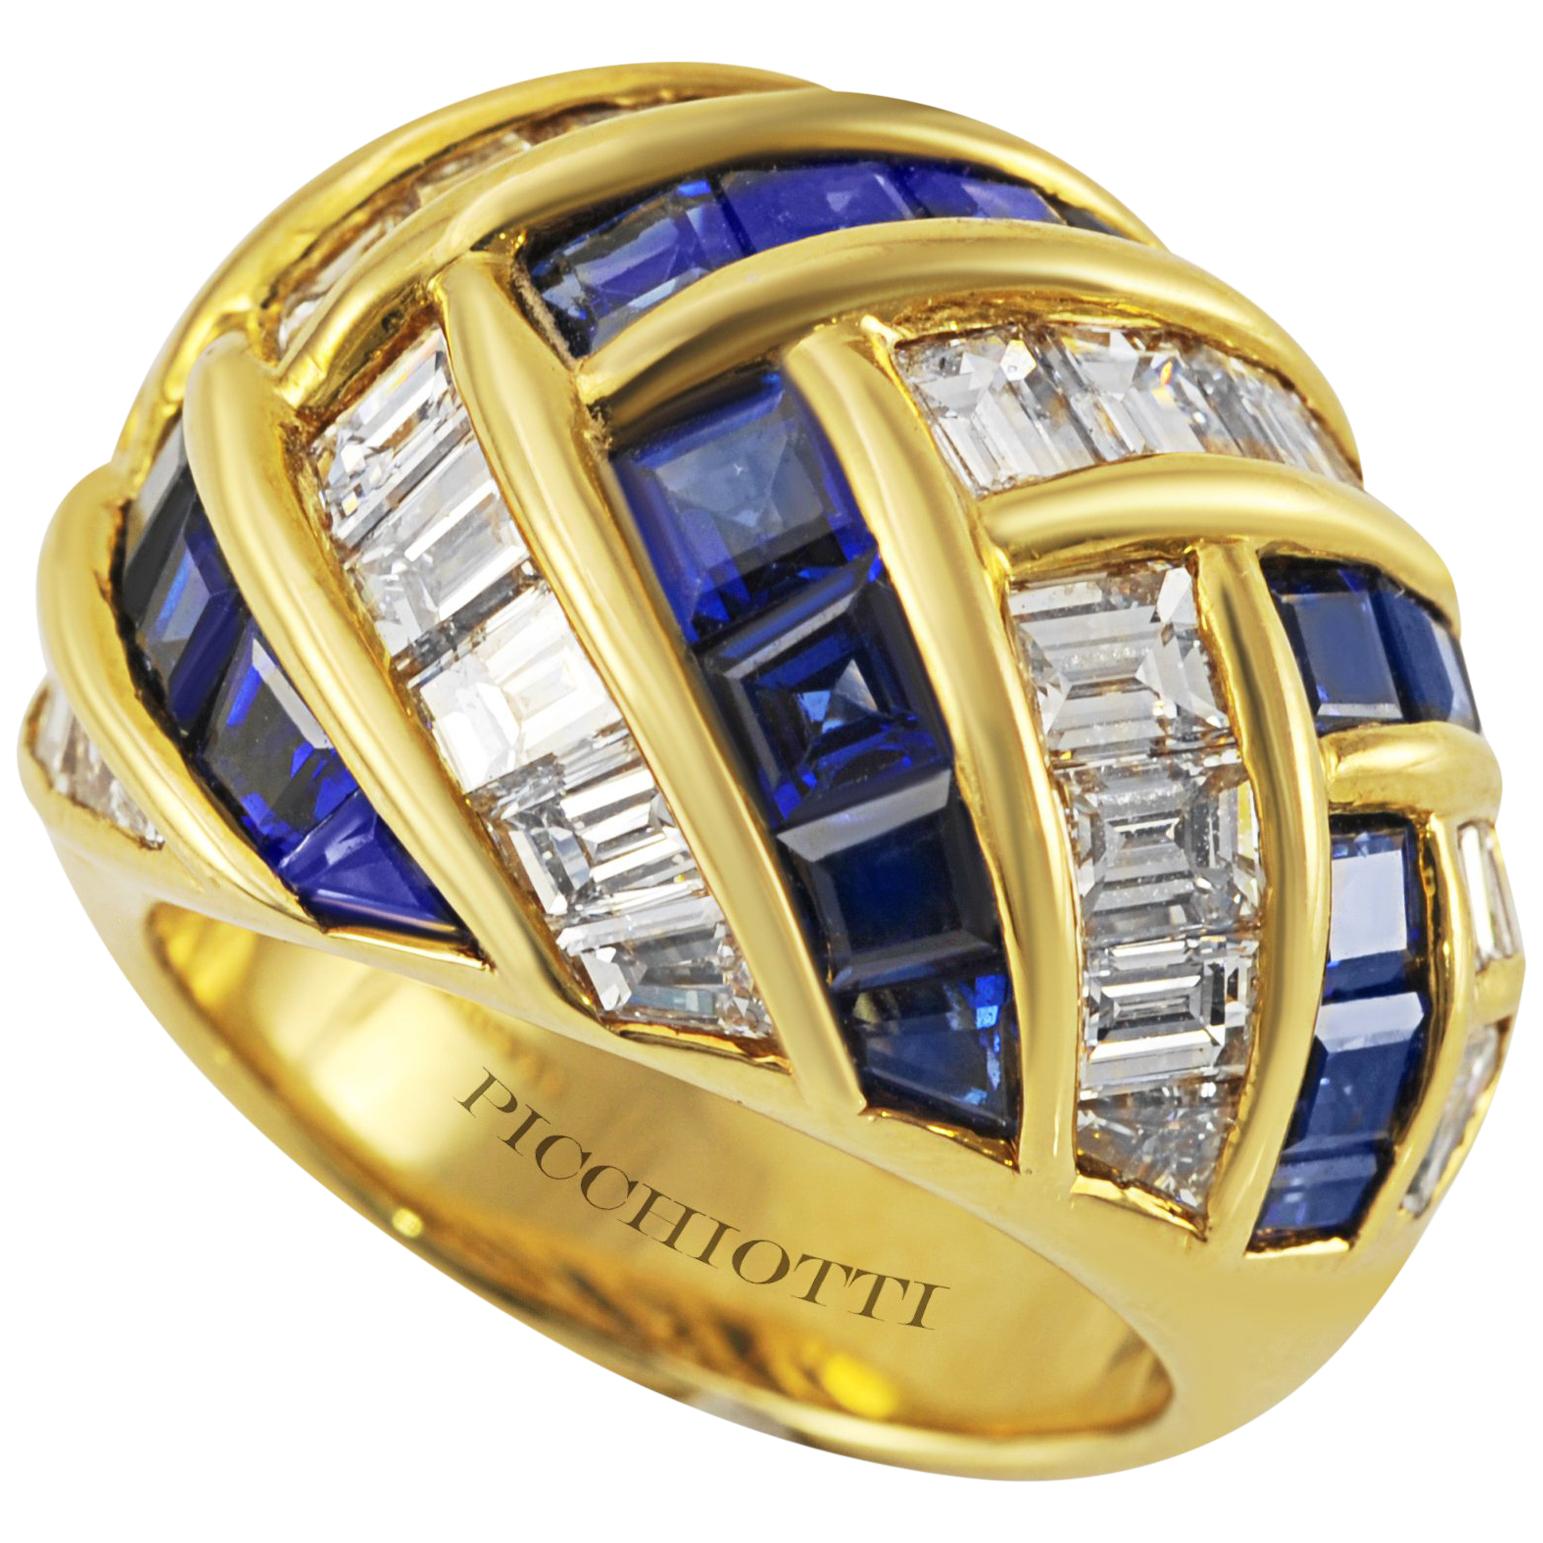 Picchiotti 18K Yellow Gold Baguette Diamond and Sapphire Cocktail Ring For Sale